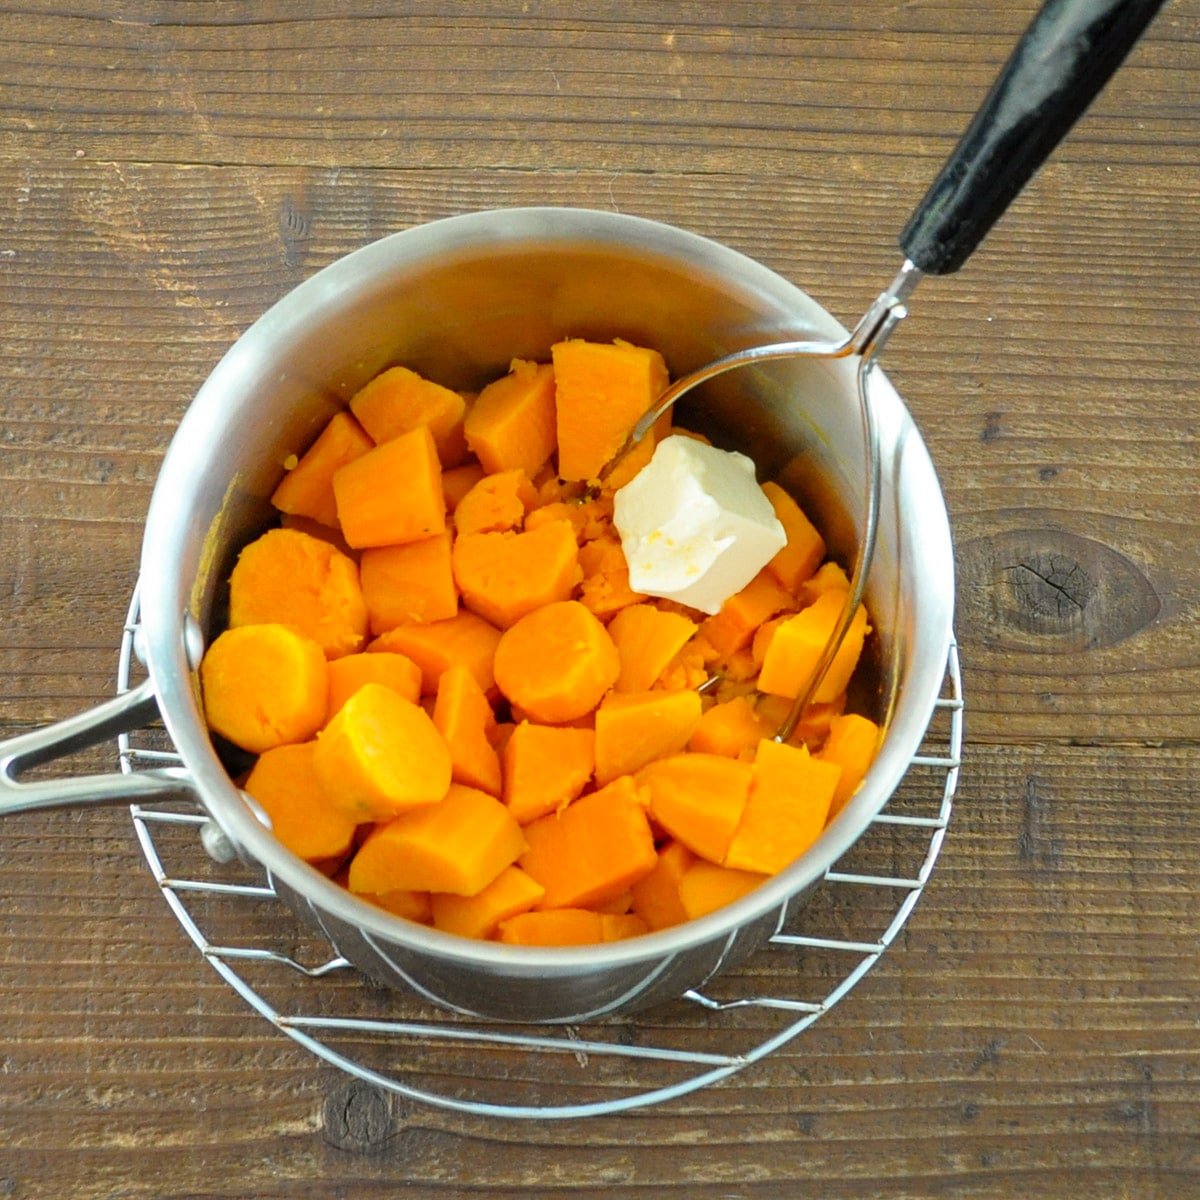 cut up sweet potatoes in a pan with some butter and a masher